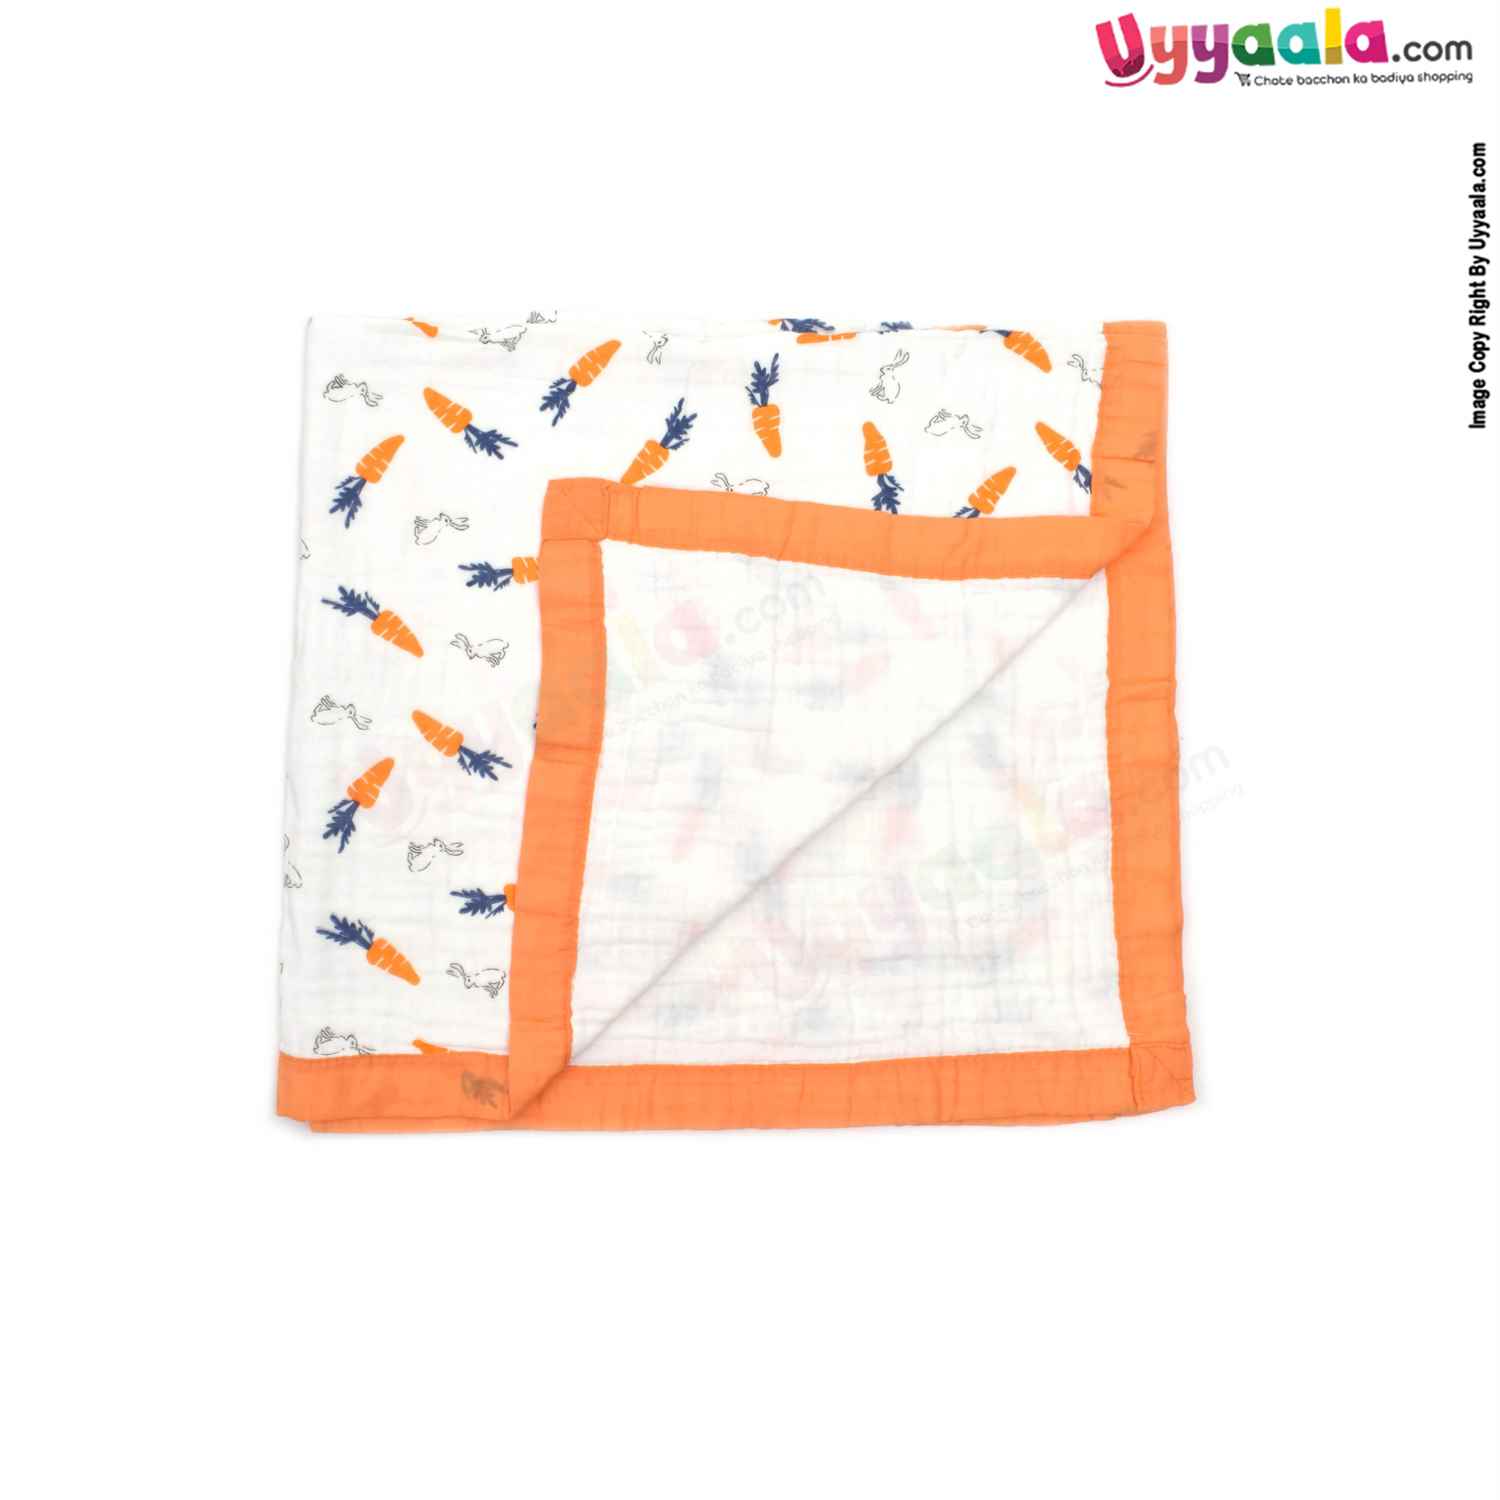 Four Layer Muslin Cotton Wrapper with Border , Rabbit & Carrot Print for Babies 0+m Age ,Size (116*101cm)-White